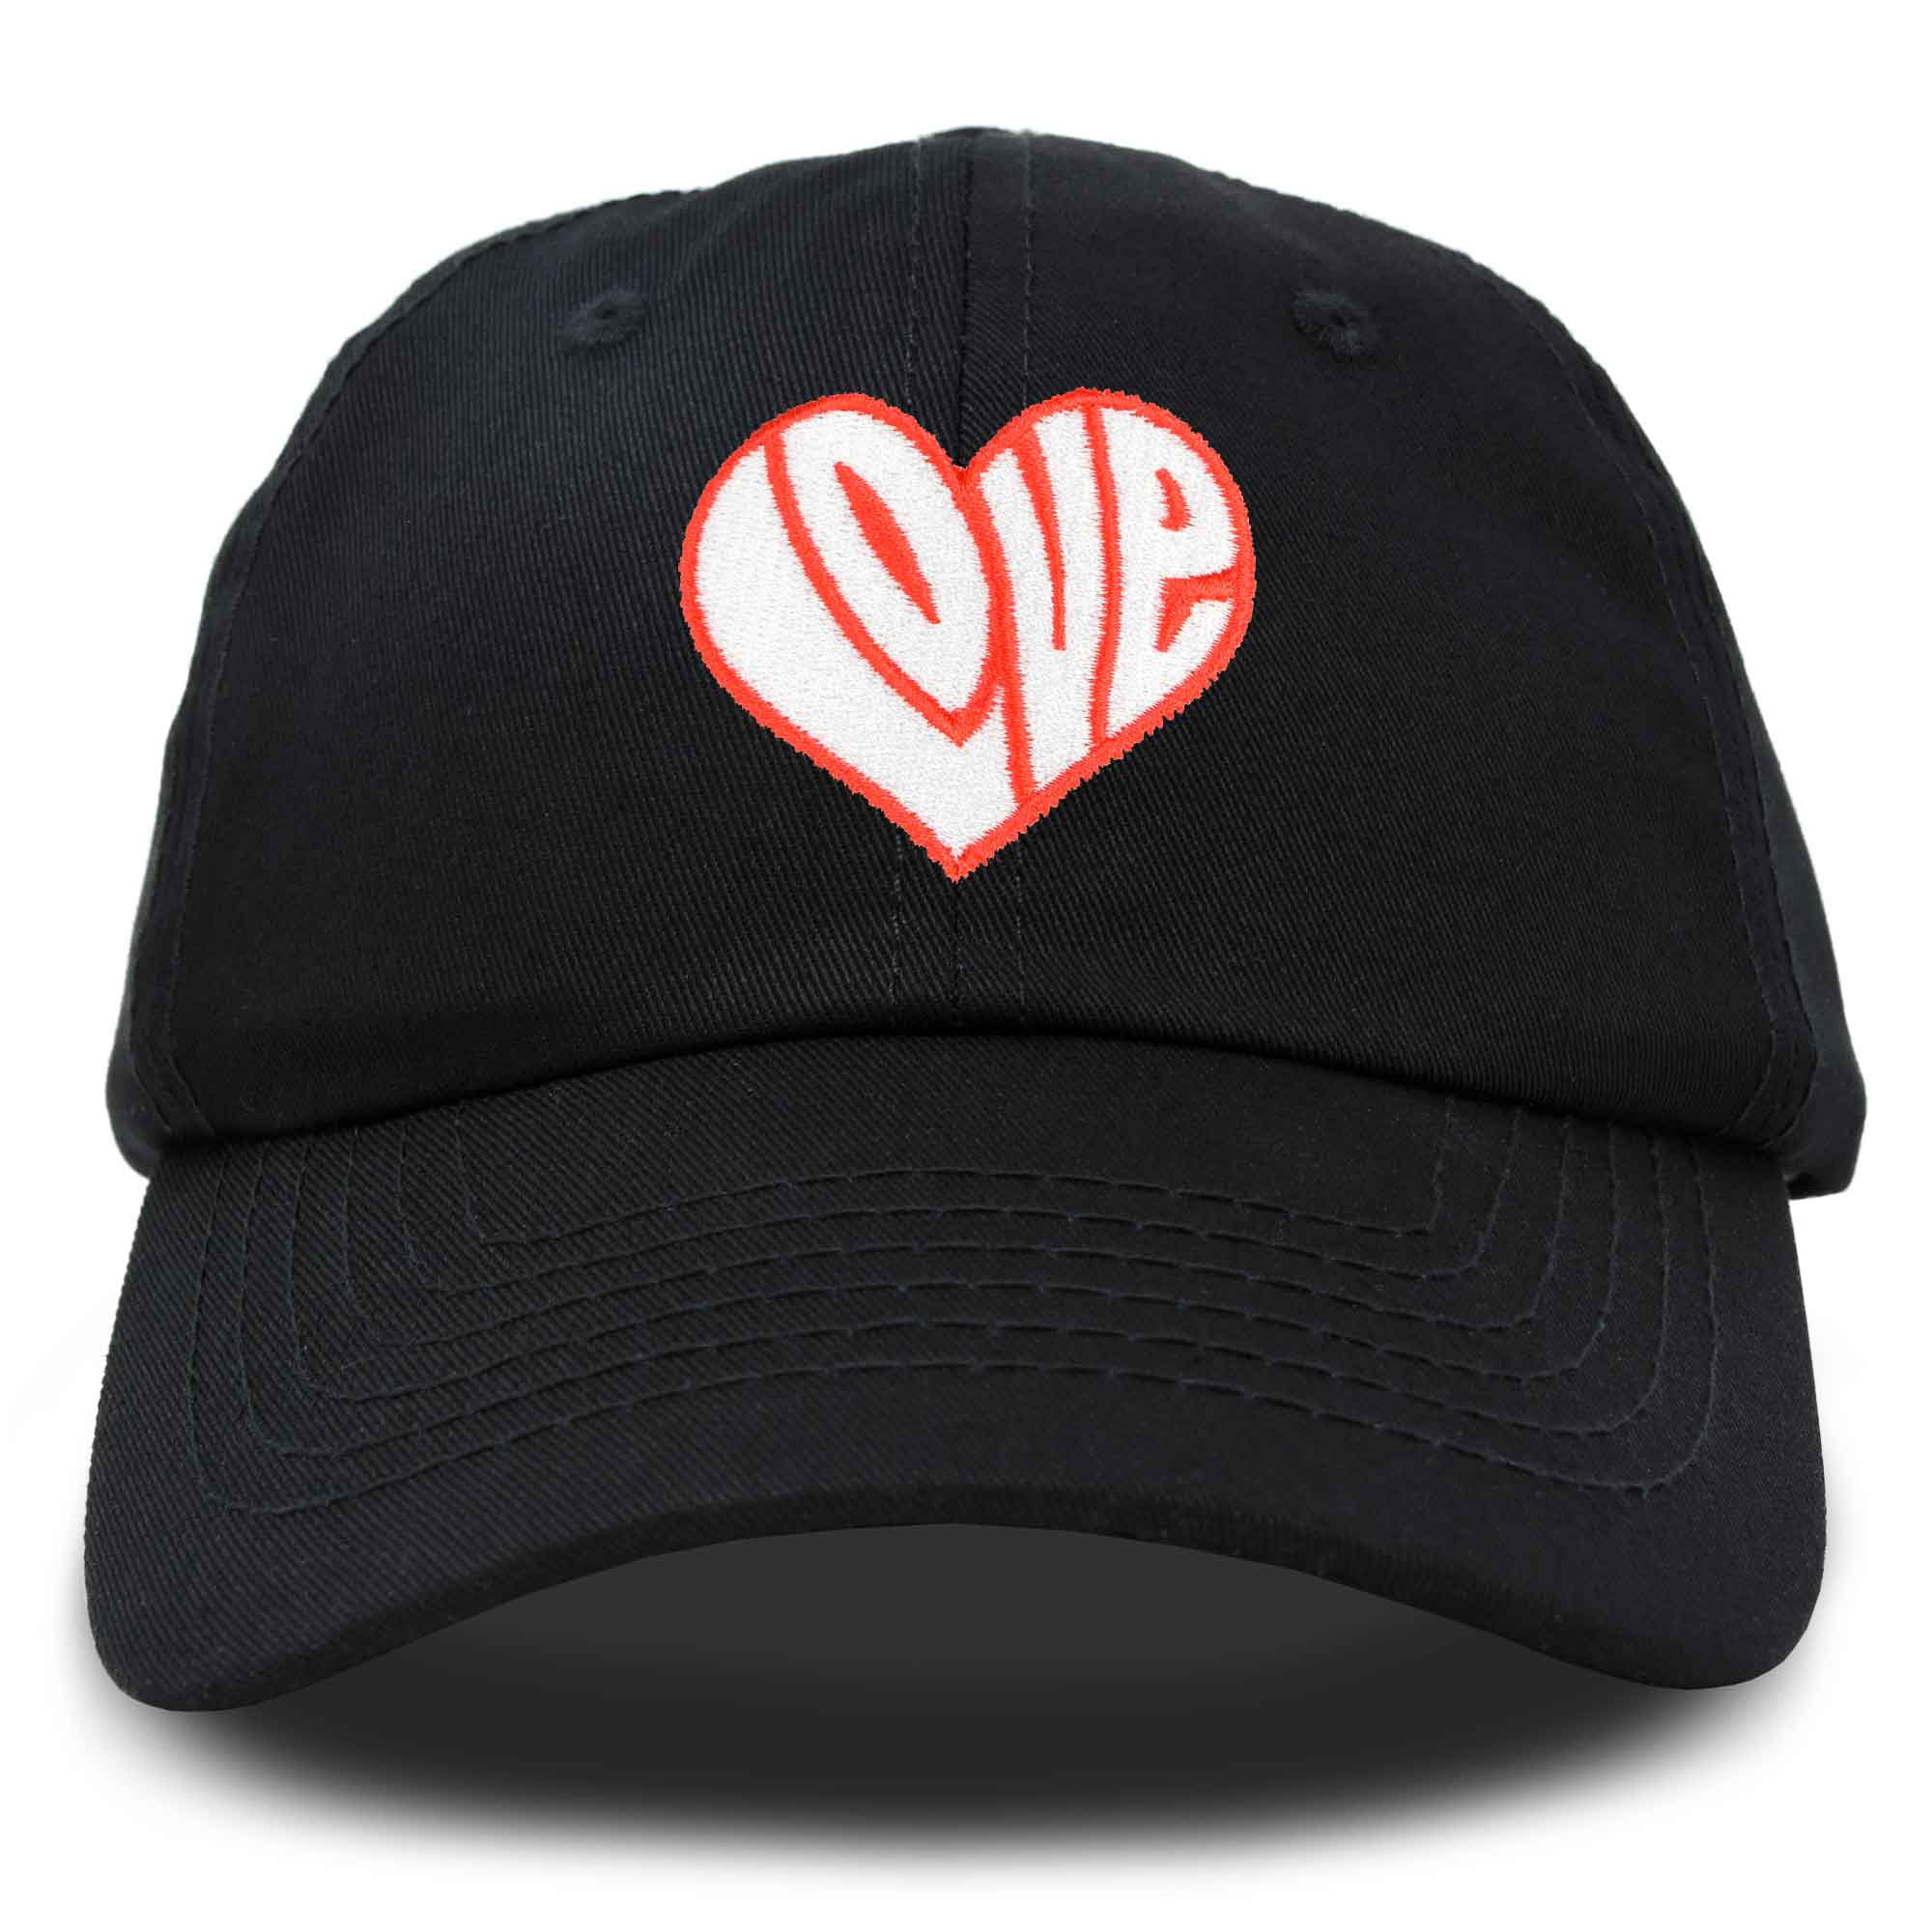 Outdoor Embroidered All Cotton Adult Cap akndhys Unisex One Size Baseball Cap Walgreens-Black-W-Logo 